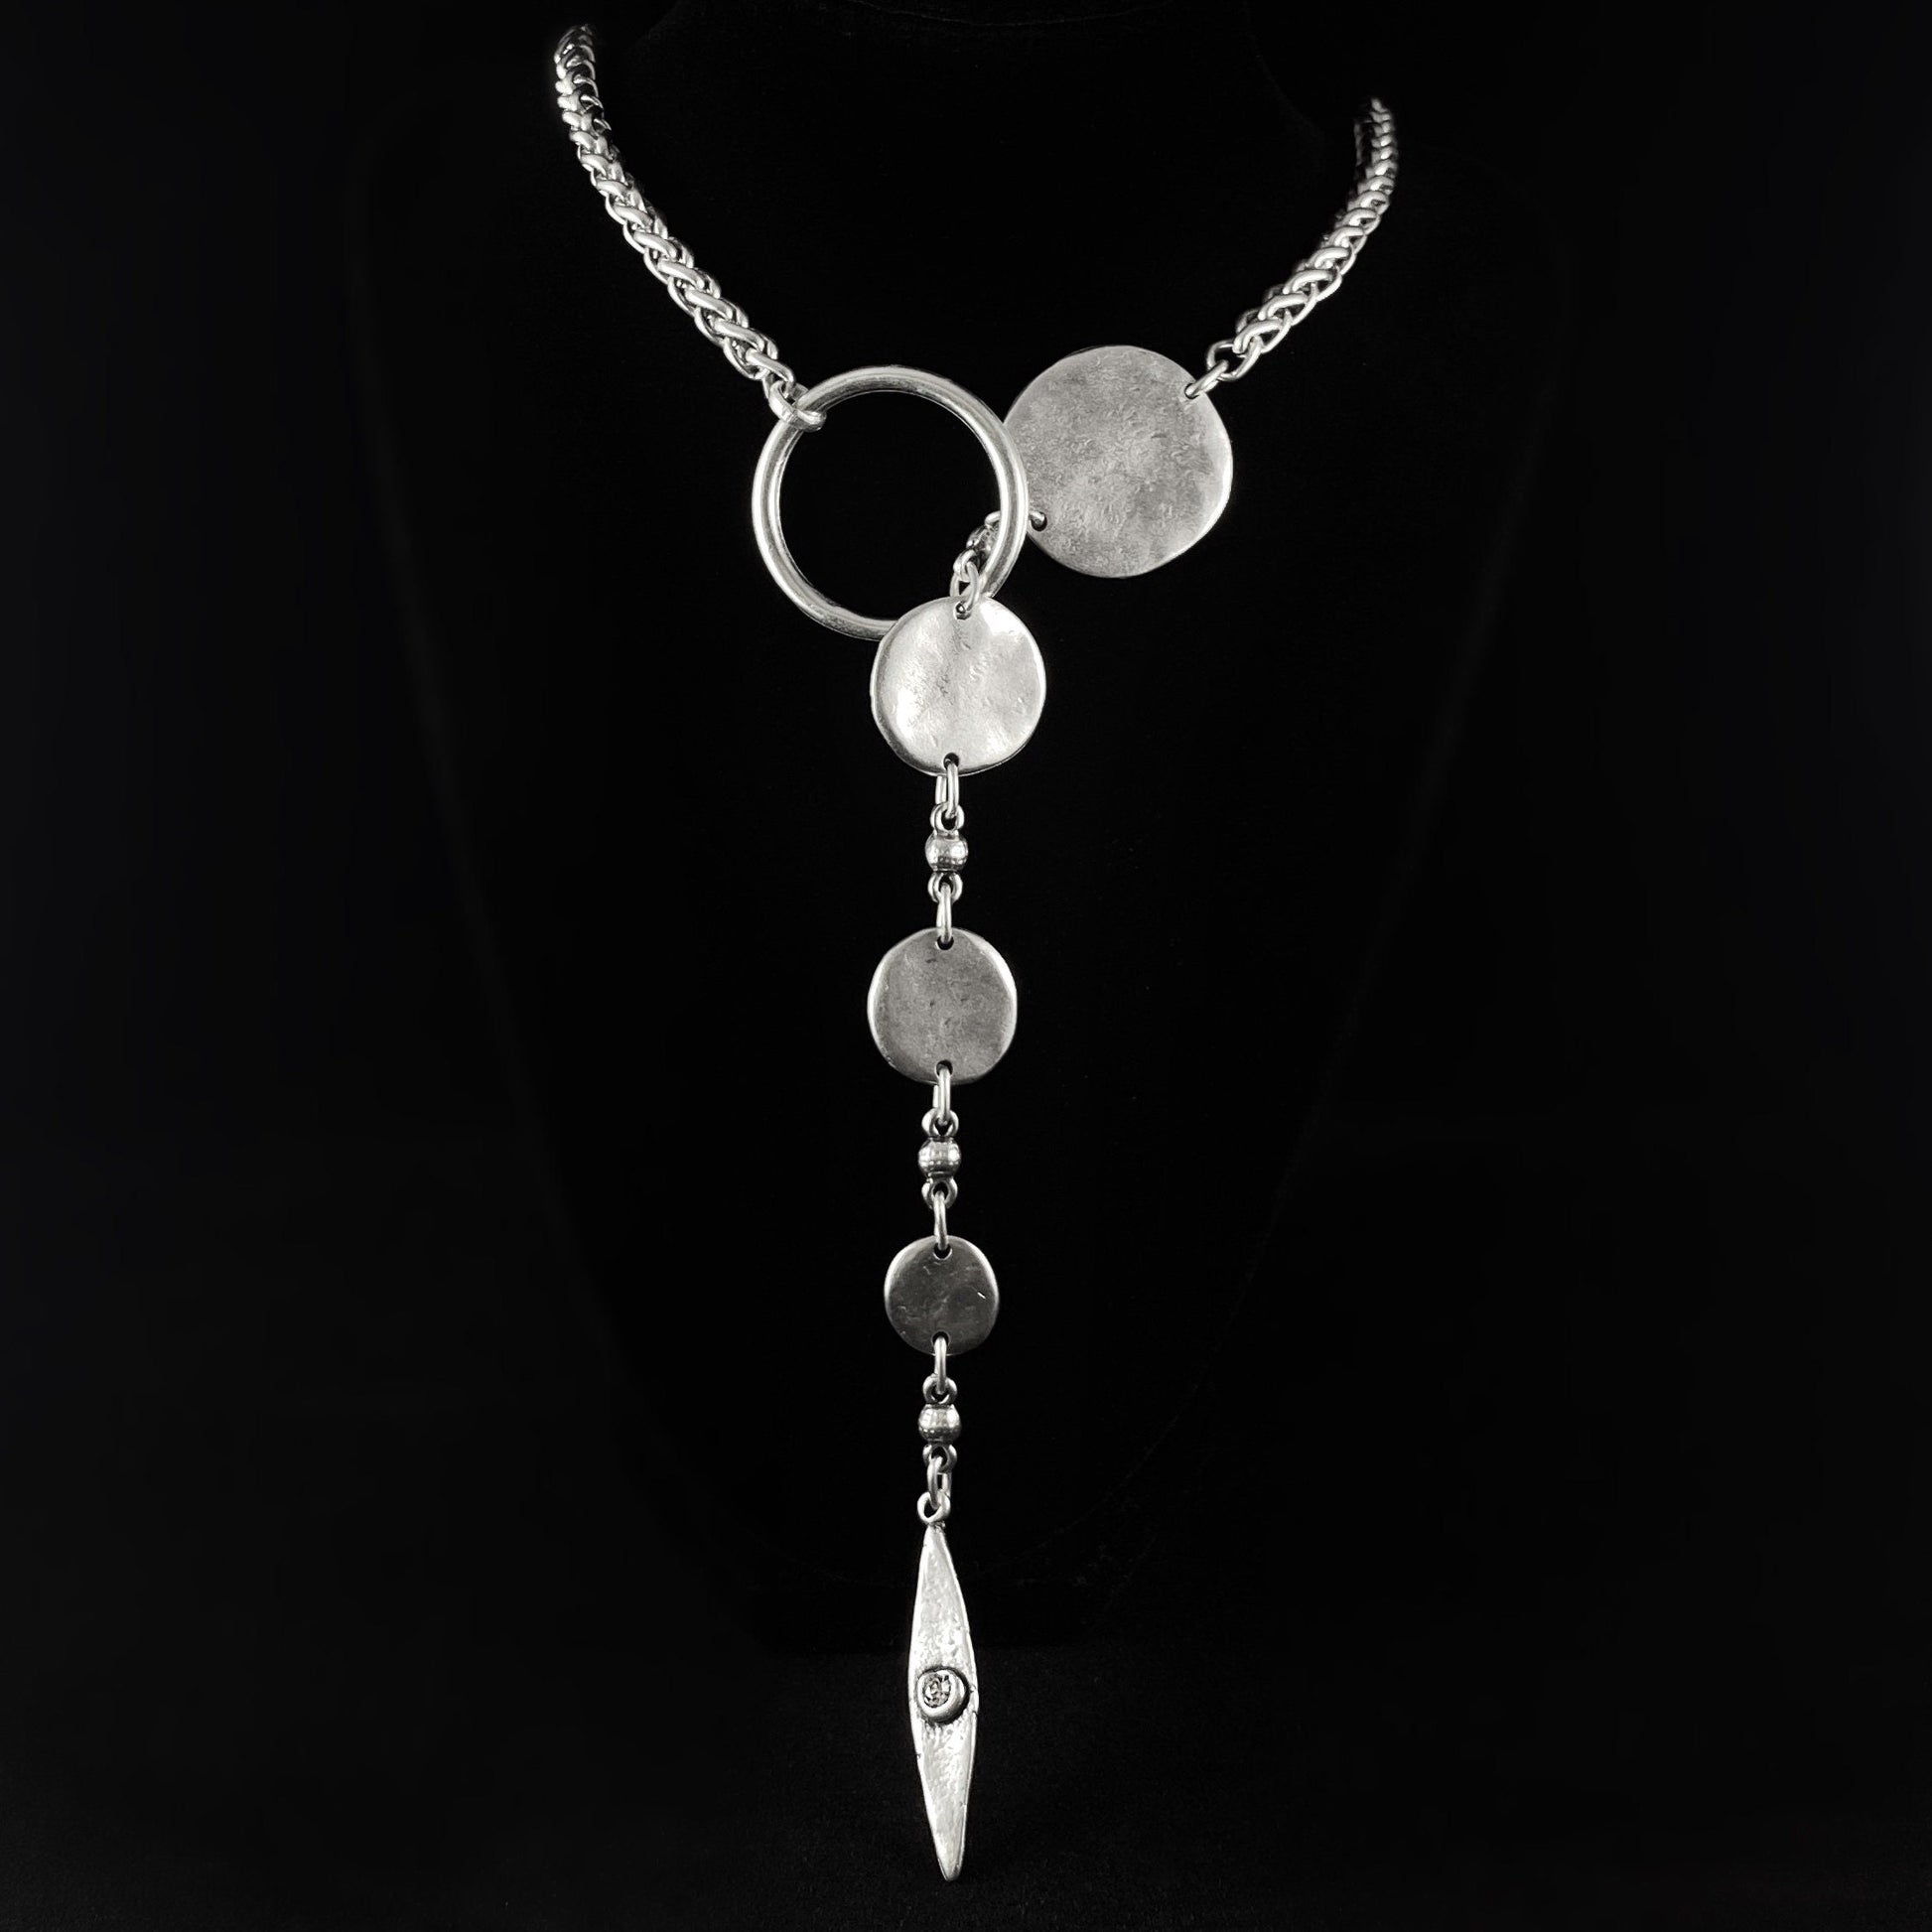 Silver Pull Through Lariat Necklace with Large Medallion Pendants, Handmade, Nickel Free